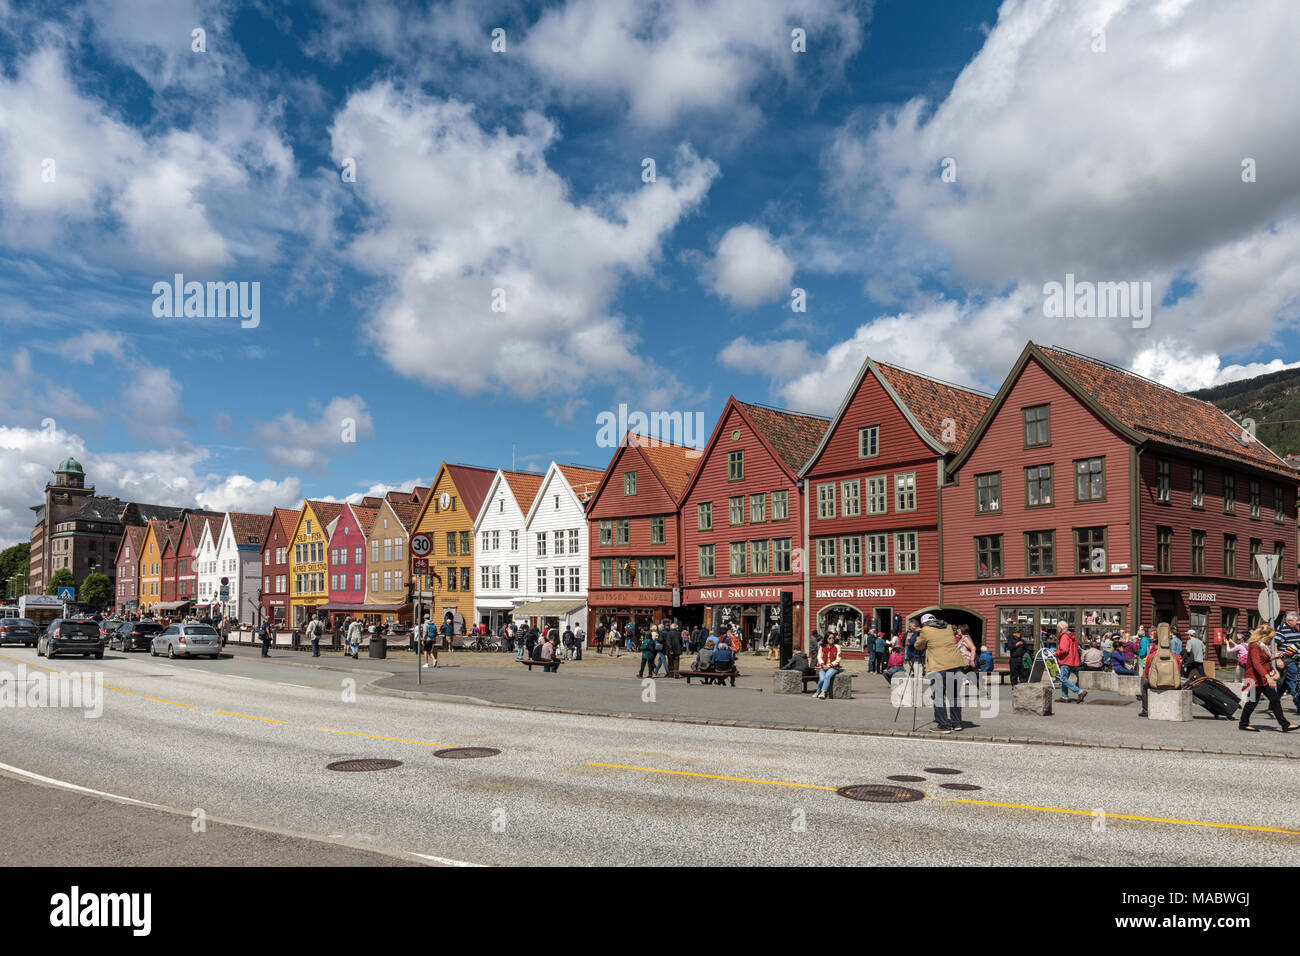 Bergen's Old Wharf district, Bryggen, wooden warehouse facades in Hanseatic styles & colors, Norway Stock Photo